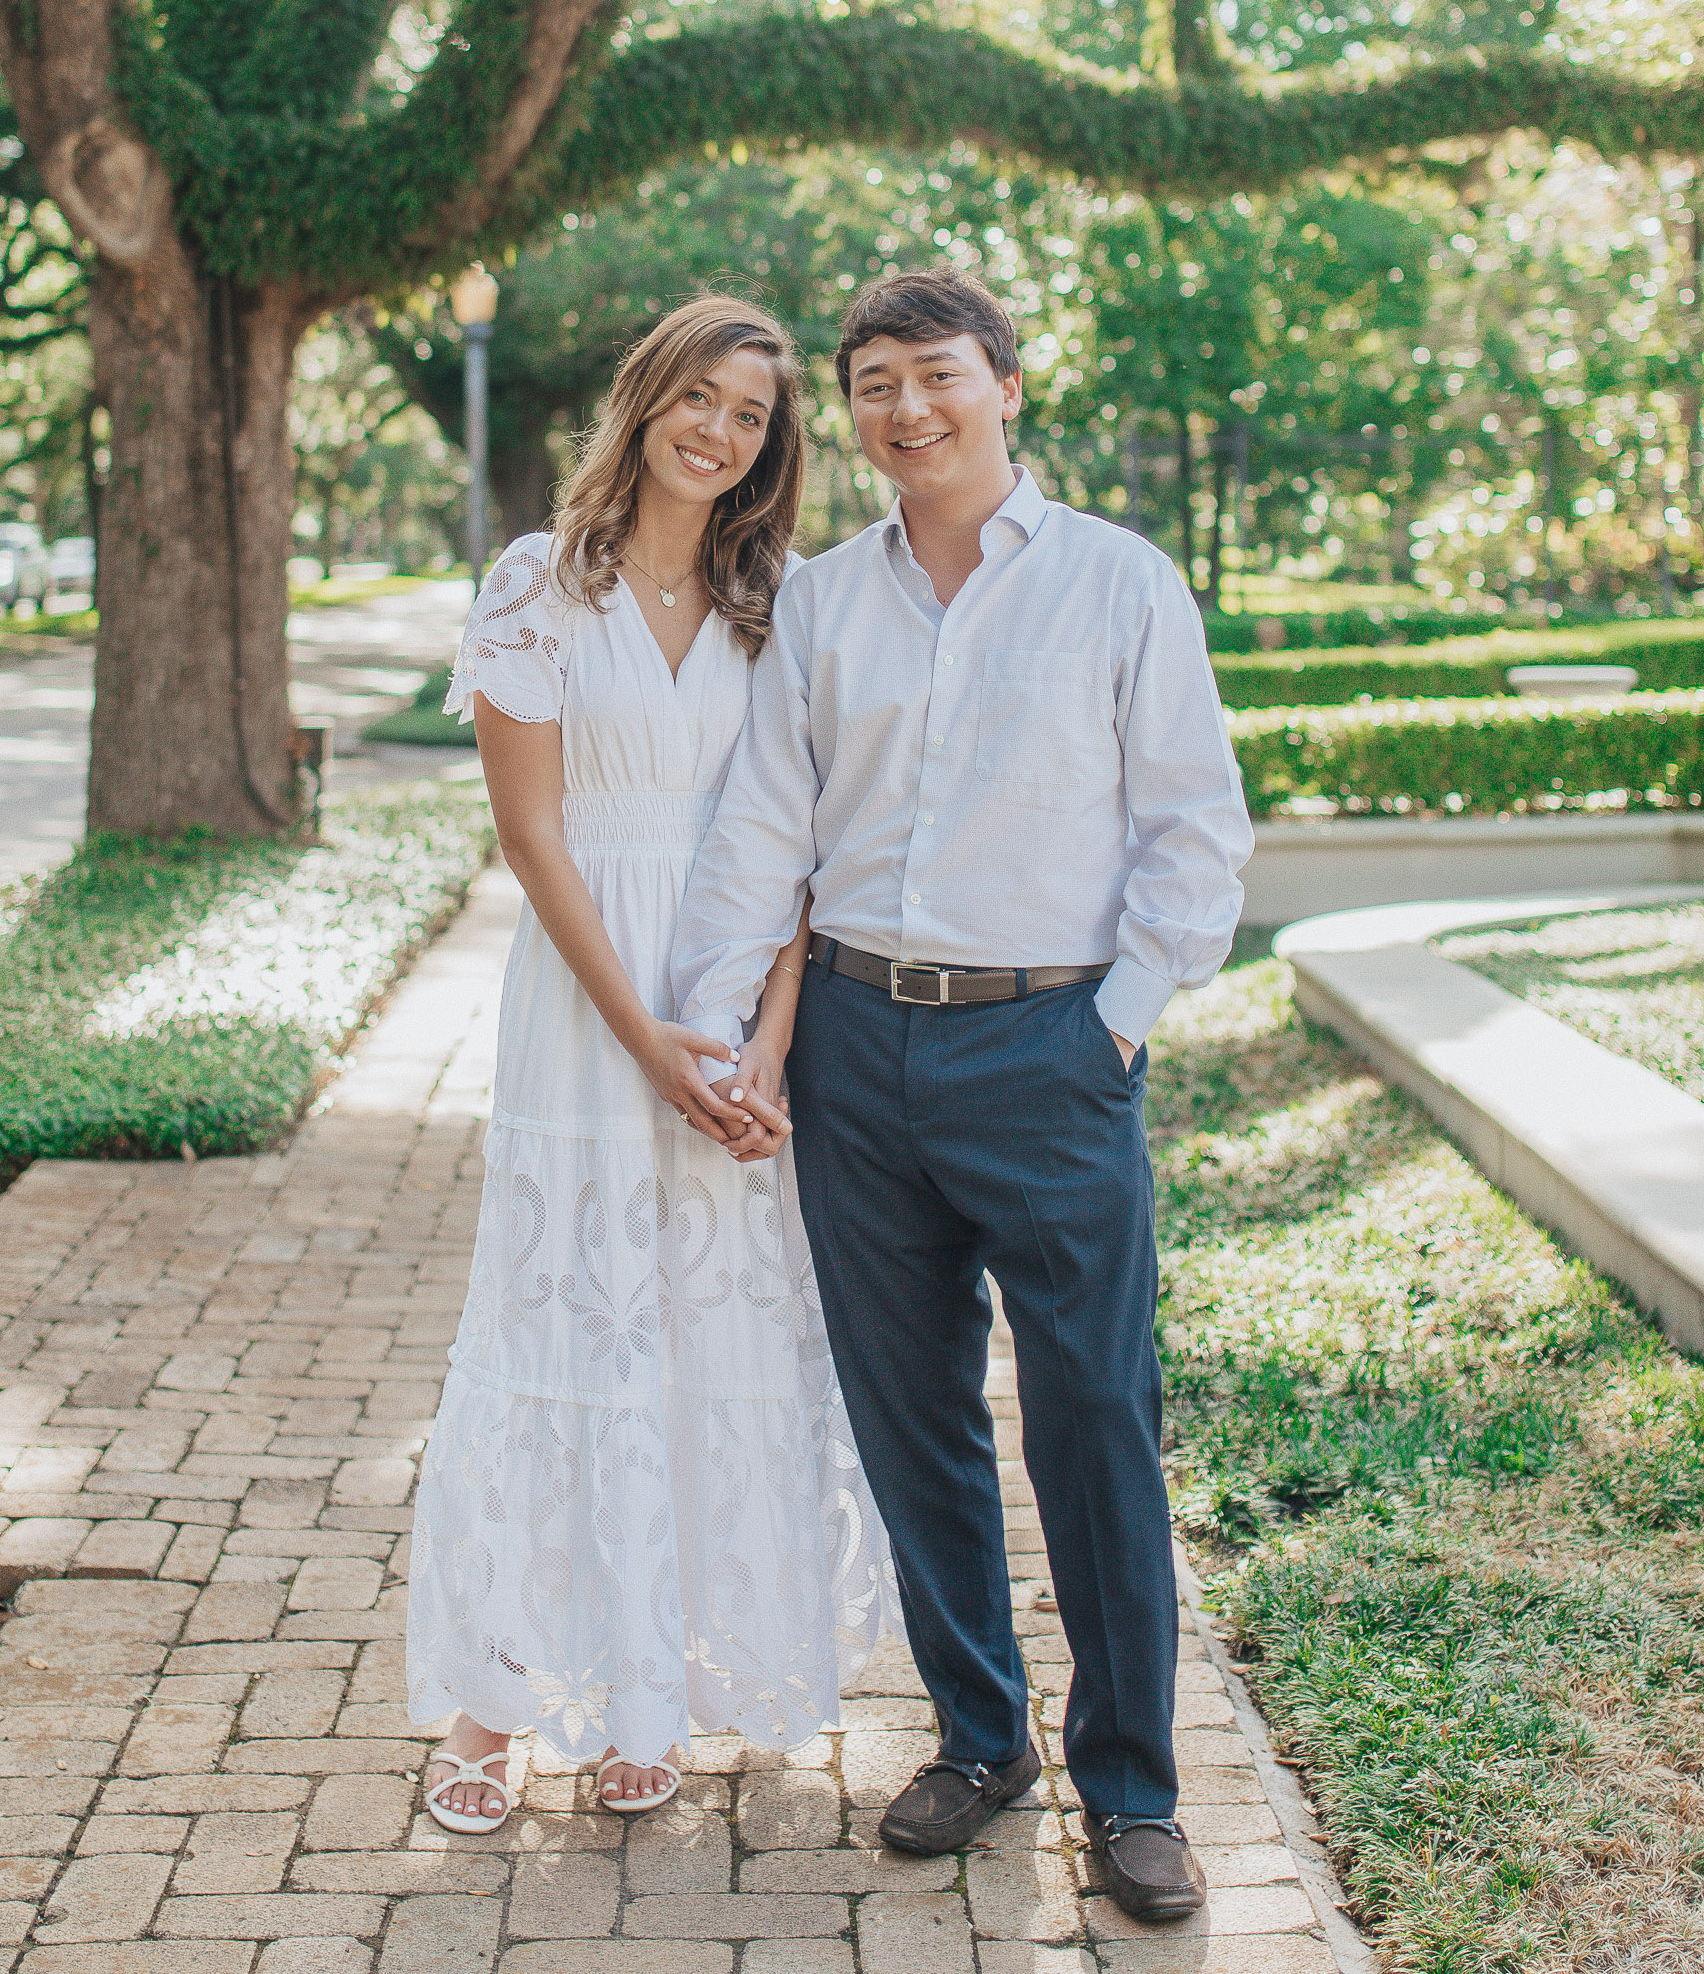 The Wedding Website of Michelle Hedrick and Stephan Warden